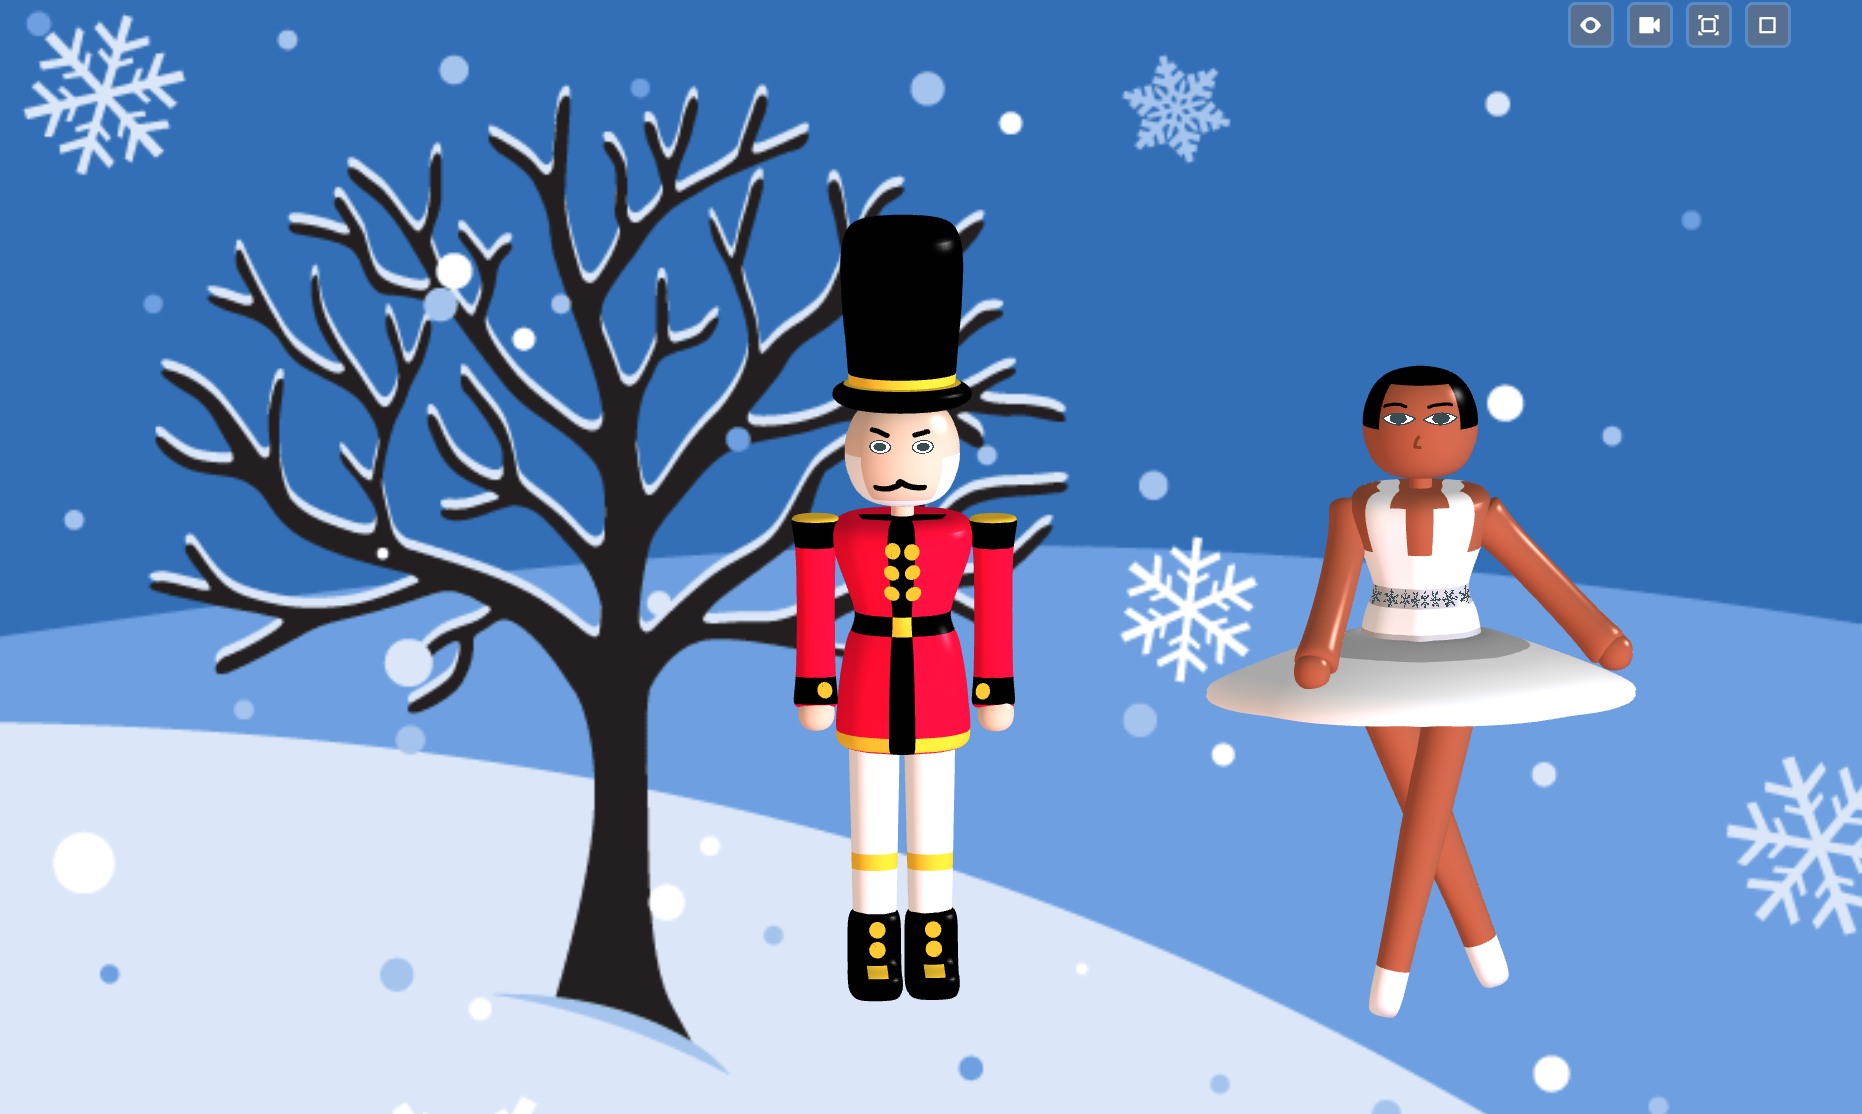 Festive fun for Crafty Families and Workshops with SOLIDWORKS Apps for Kids